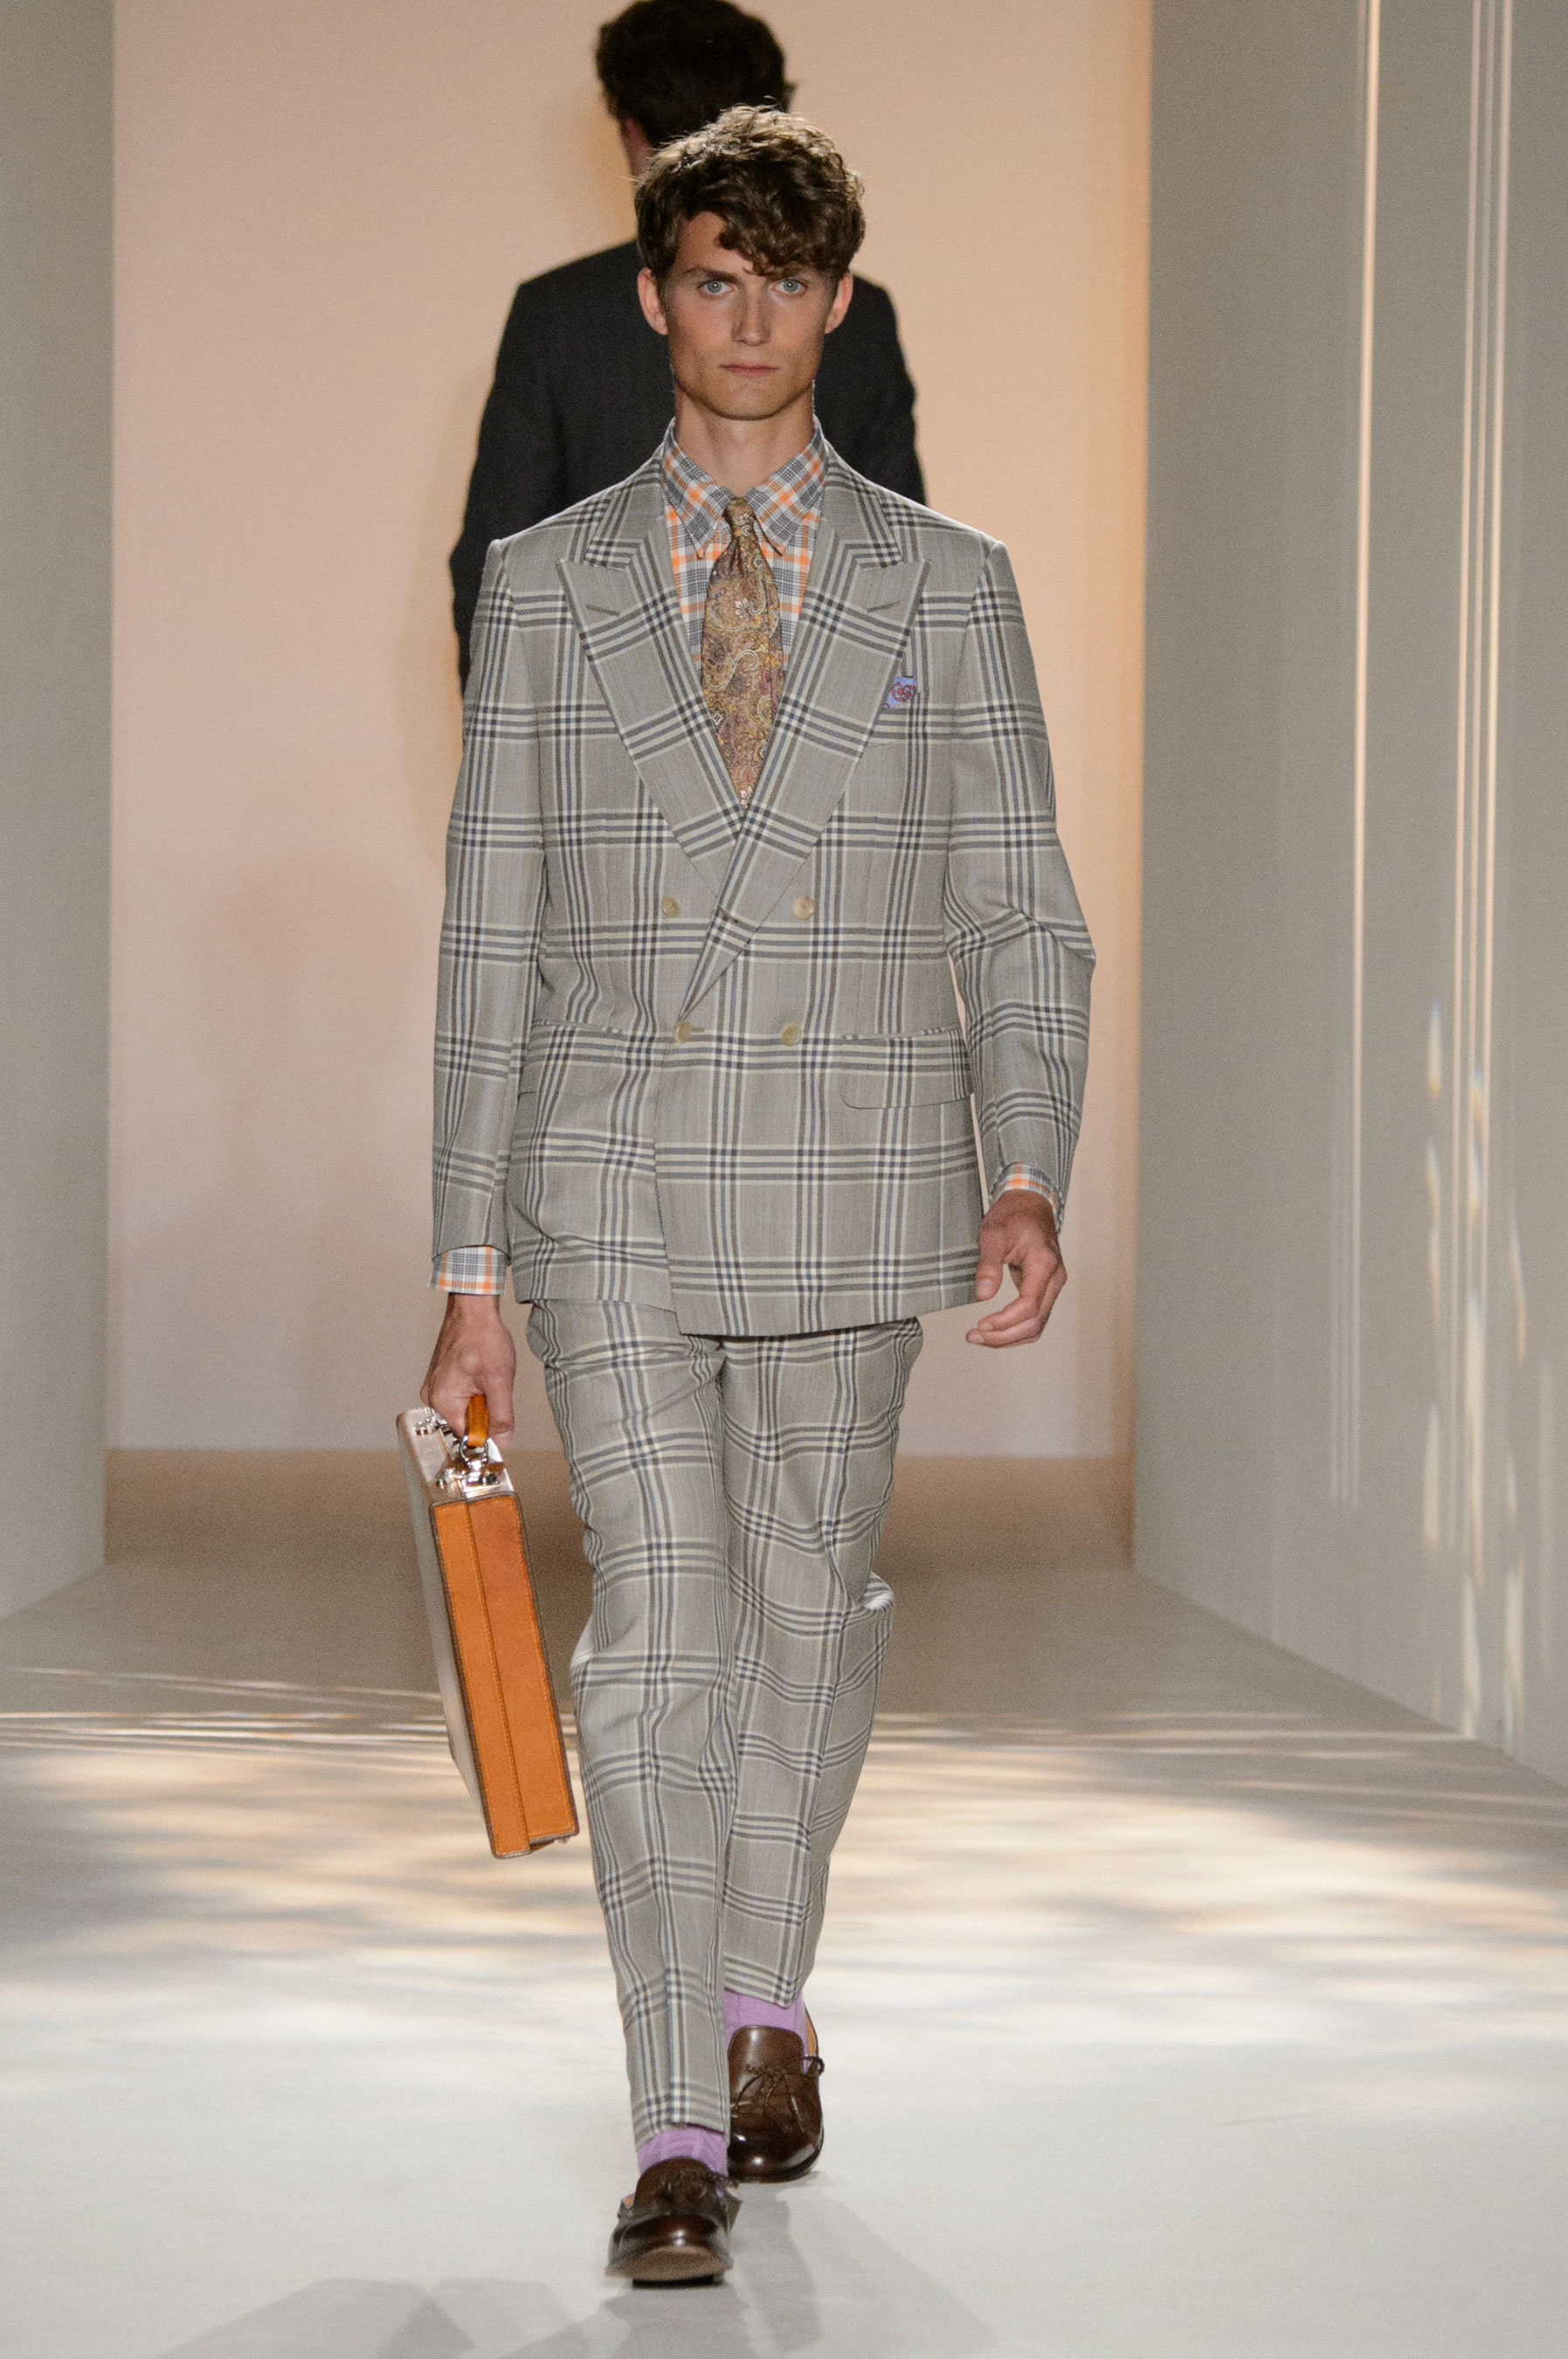 Dunhill Spring/Summer 2016 | London Collections: Men | The Fashionisto